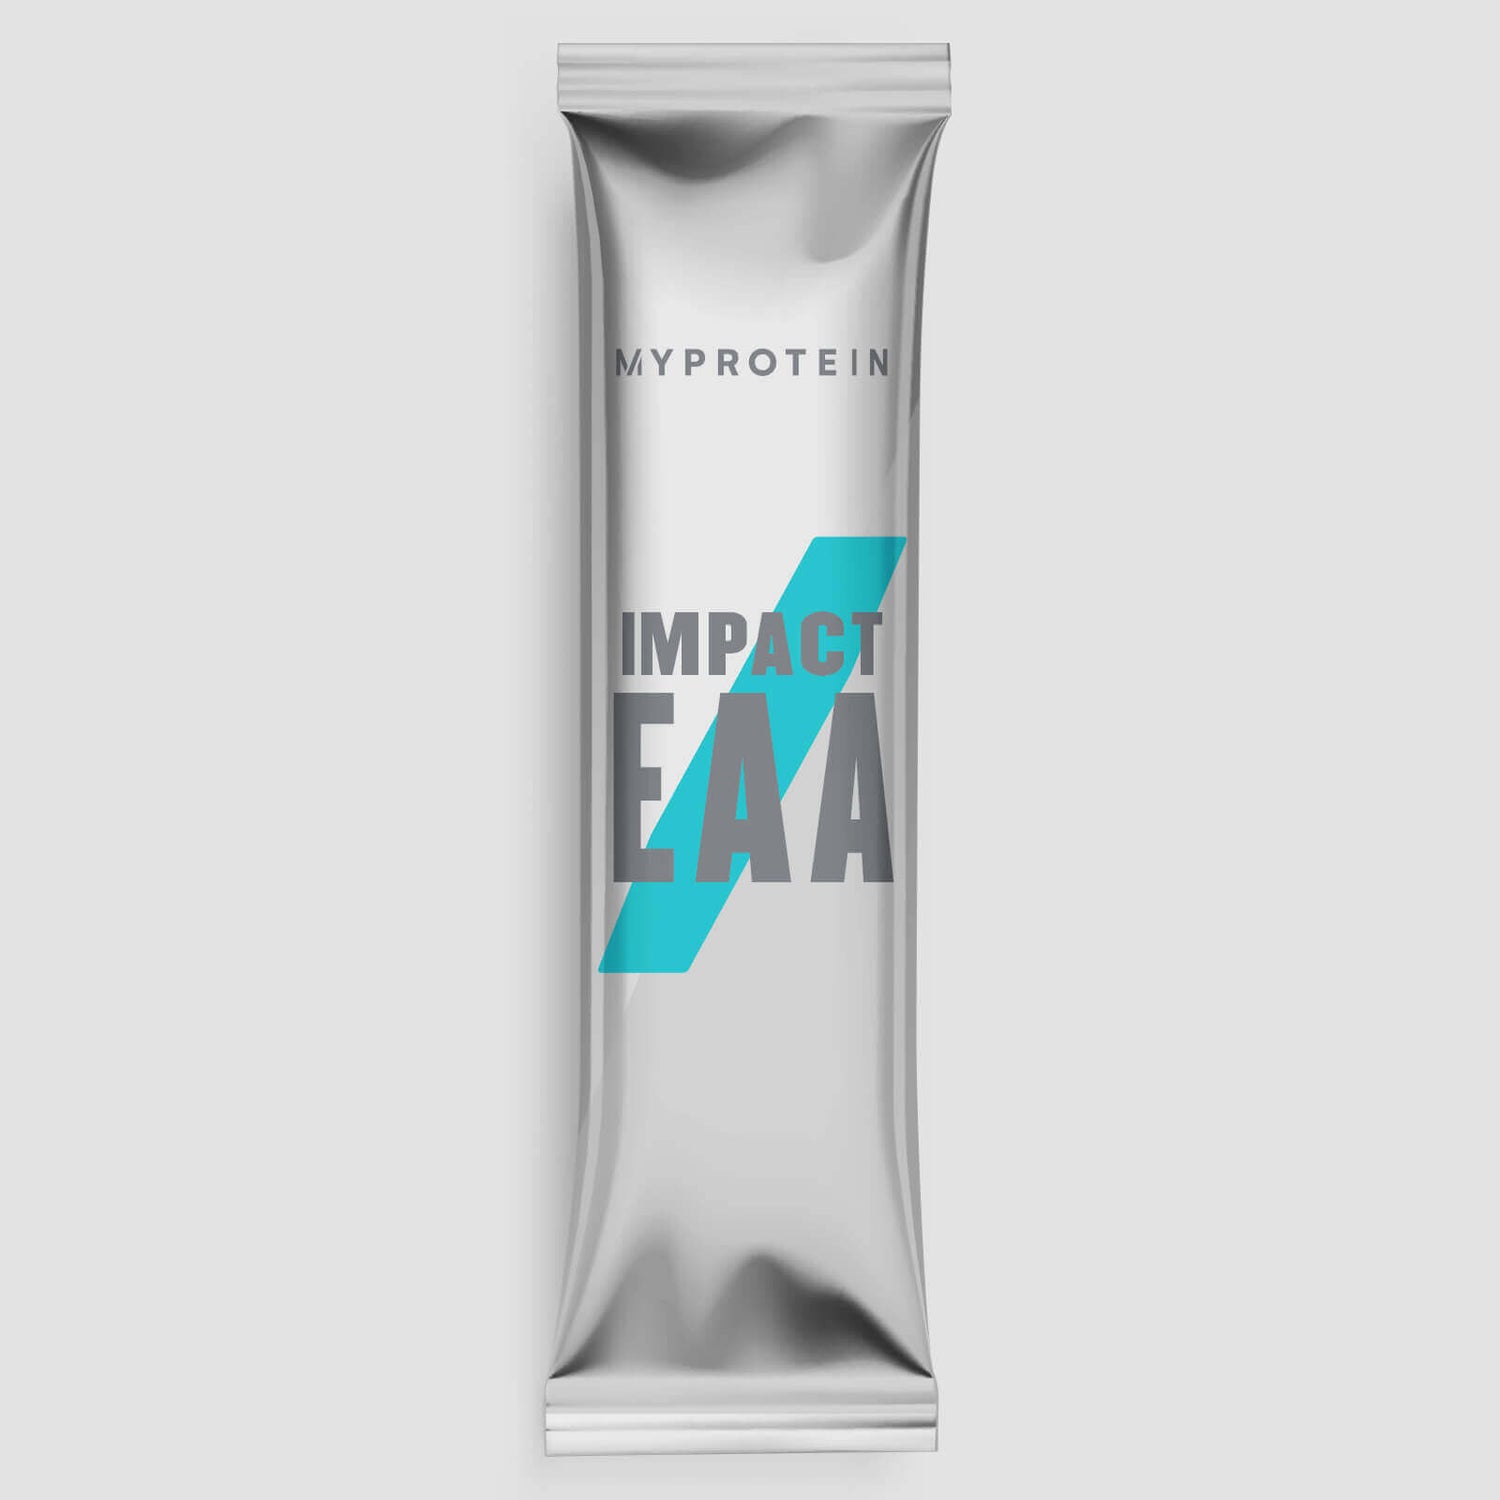 Myprotein Impact EAA Stick Pack (Sample) - 7g - Bez Arome